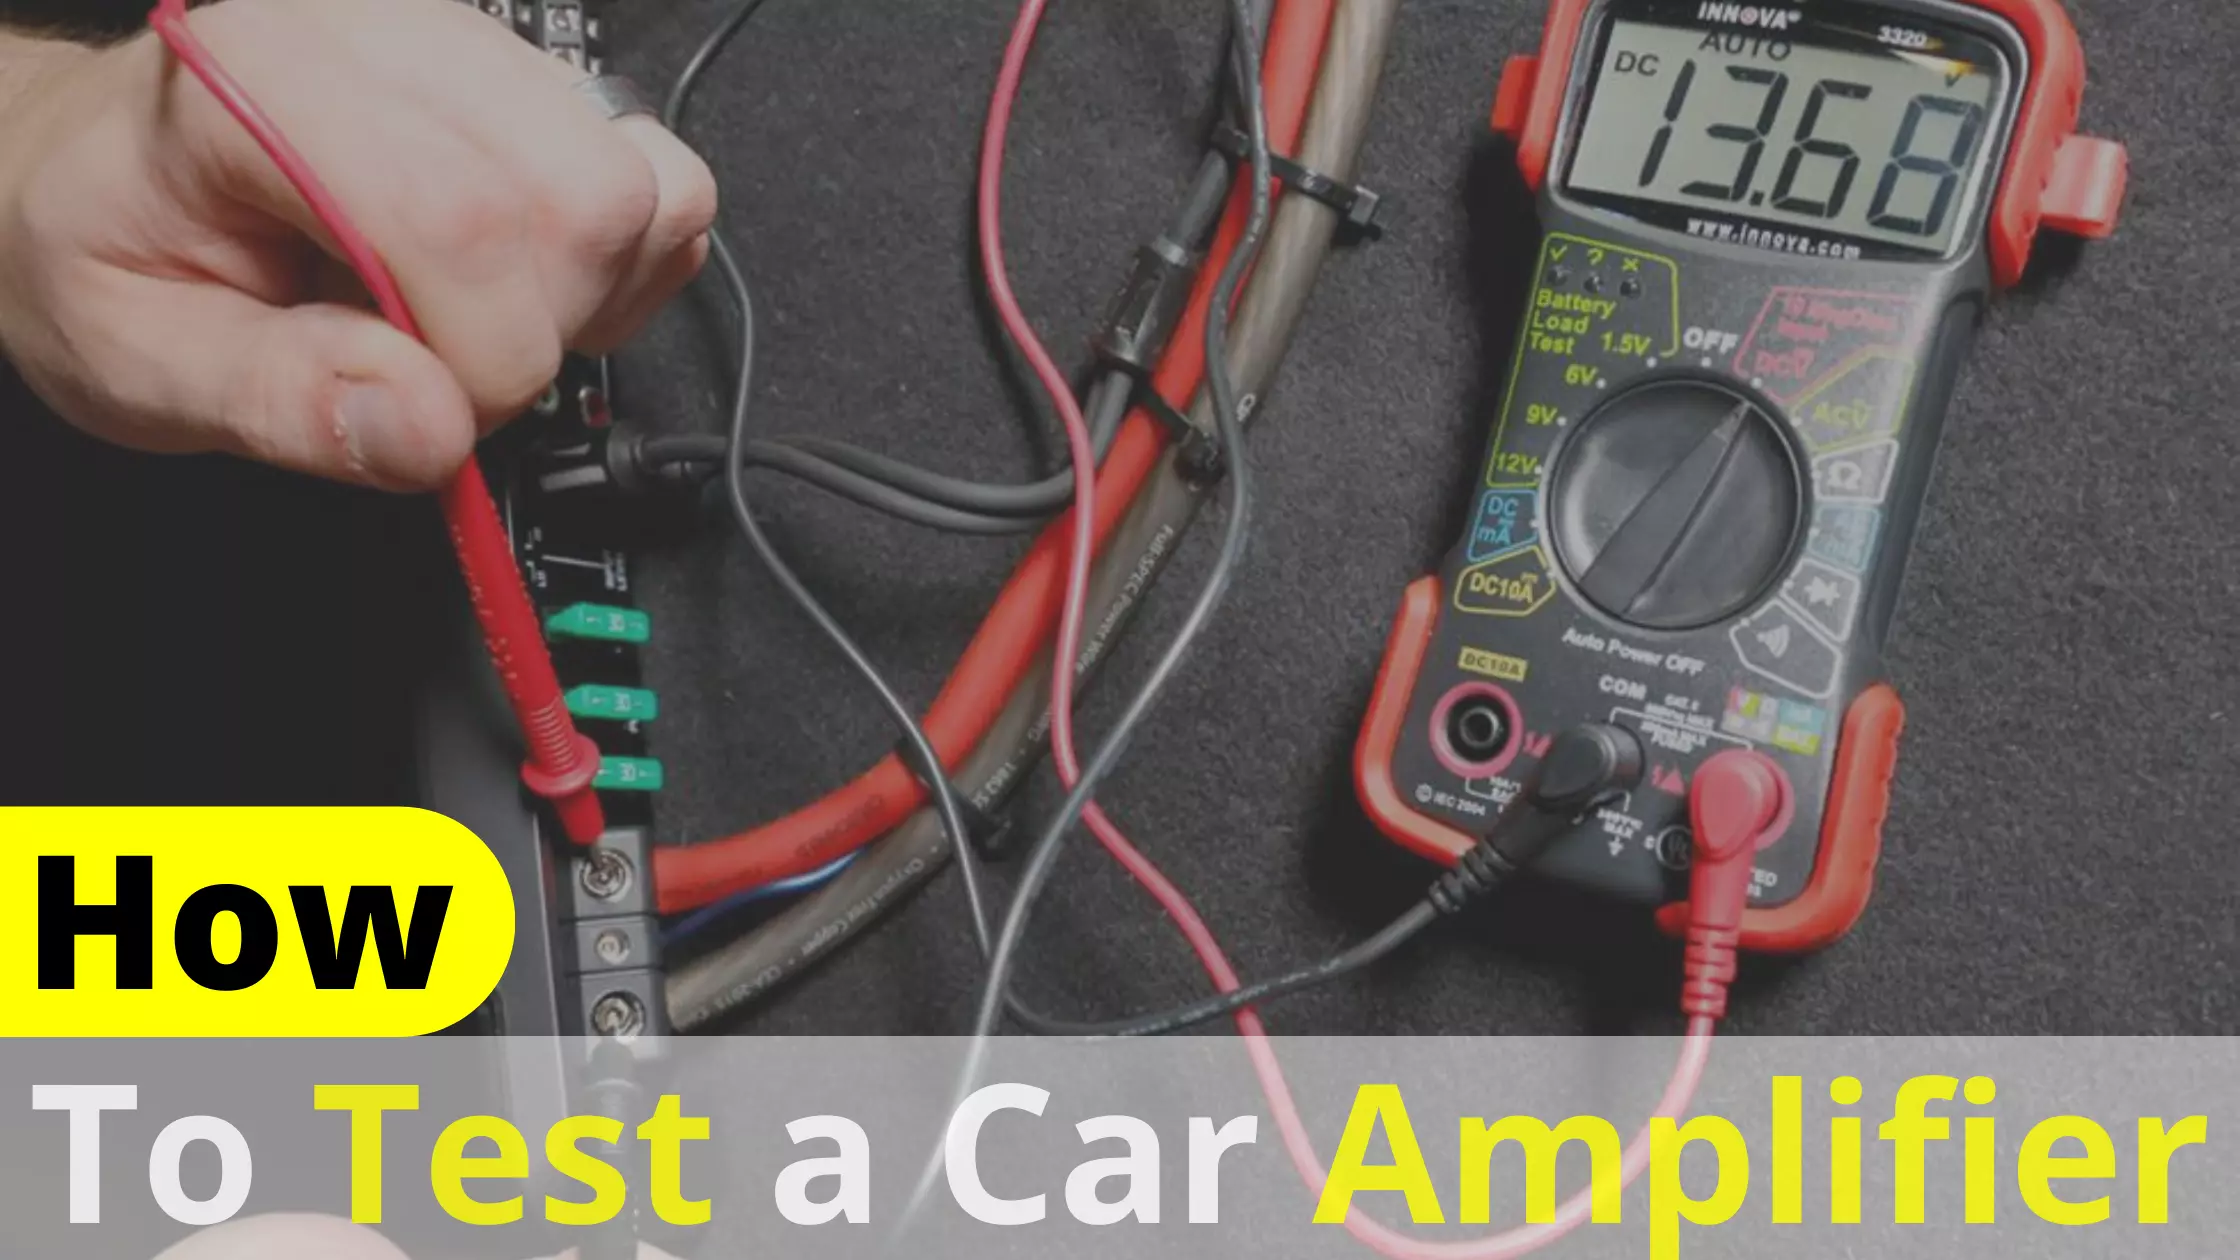 How To Test A Car Amplifier? Ultimate Guide